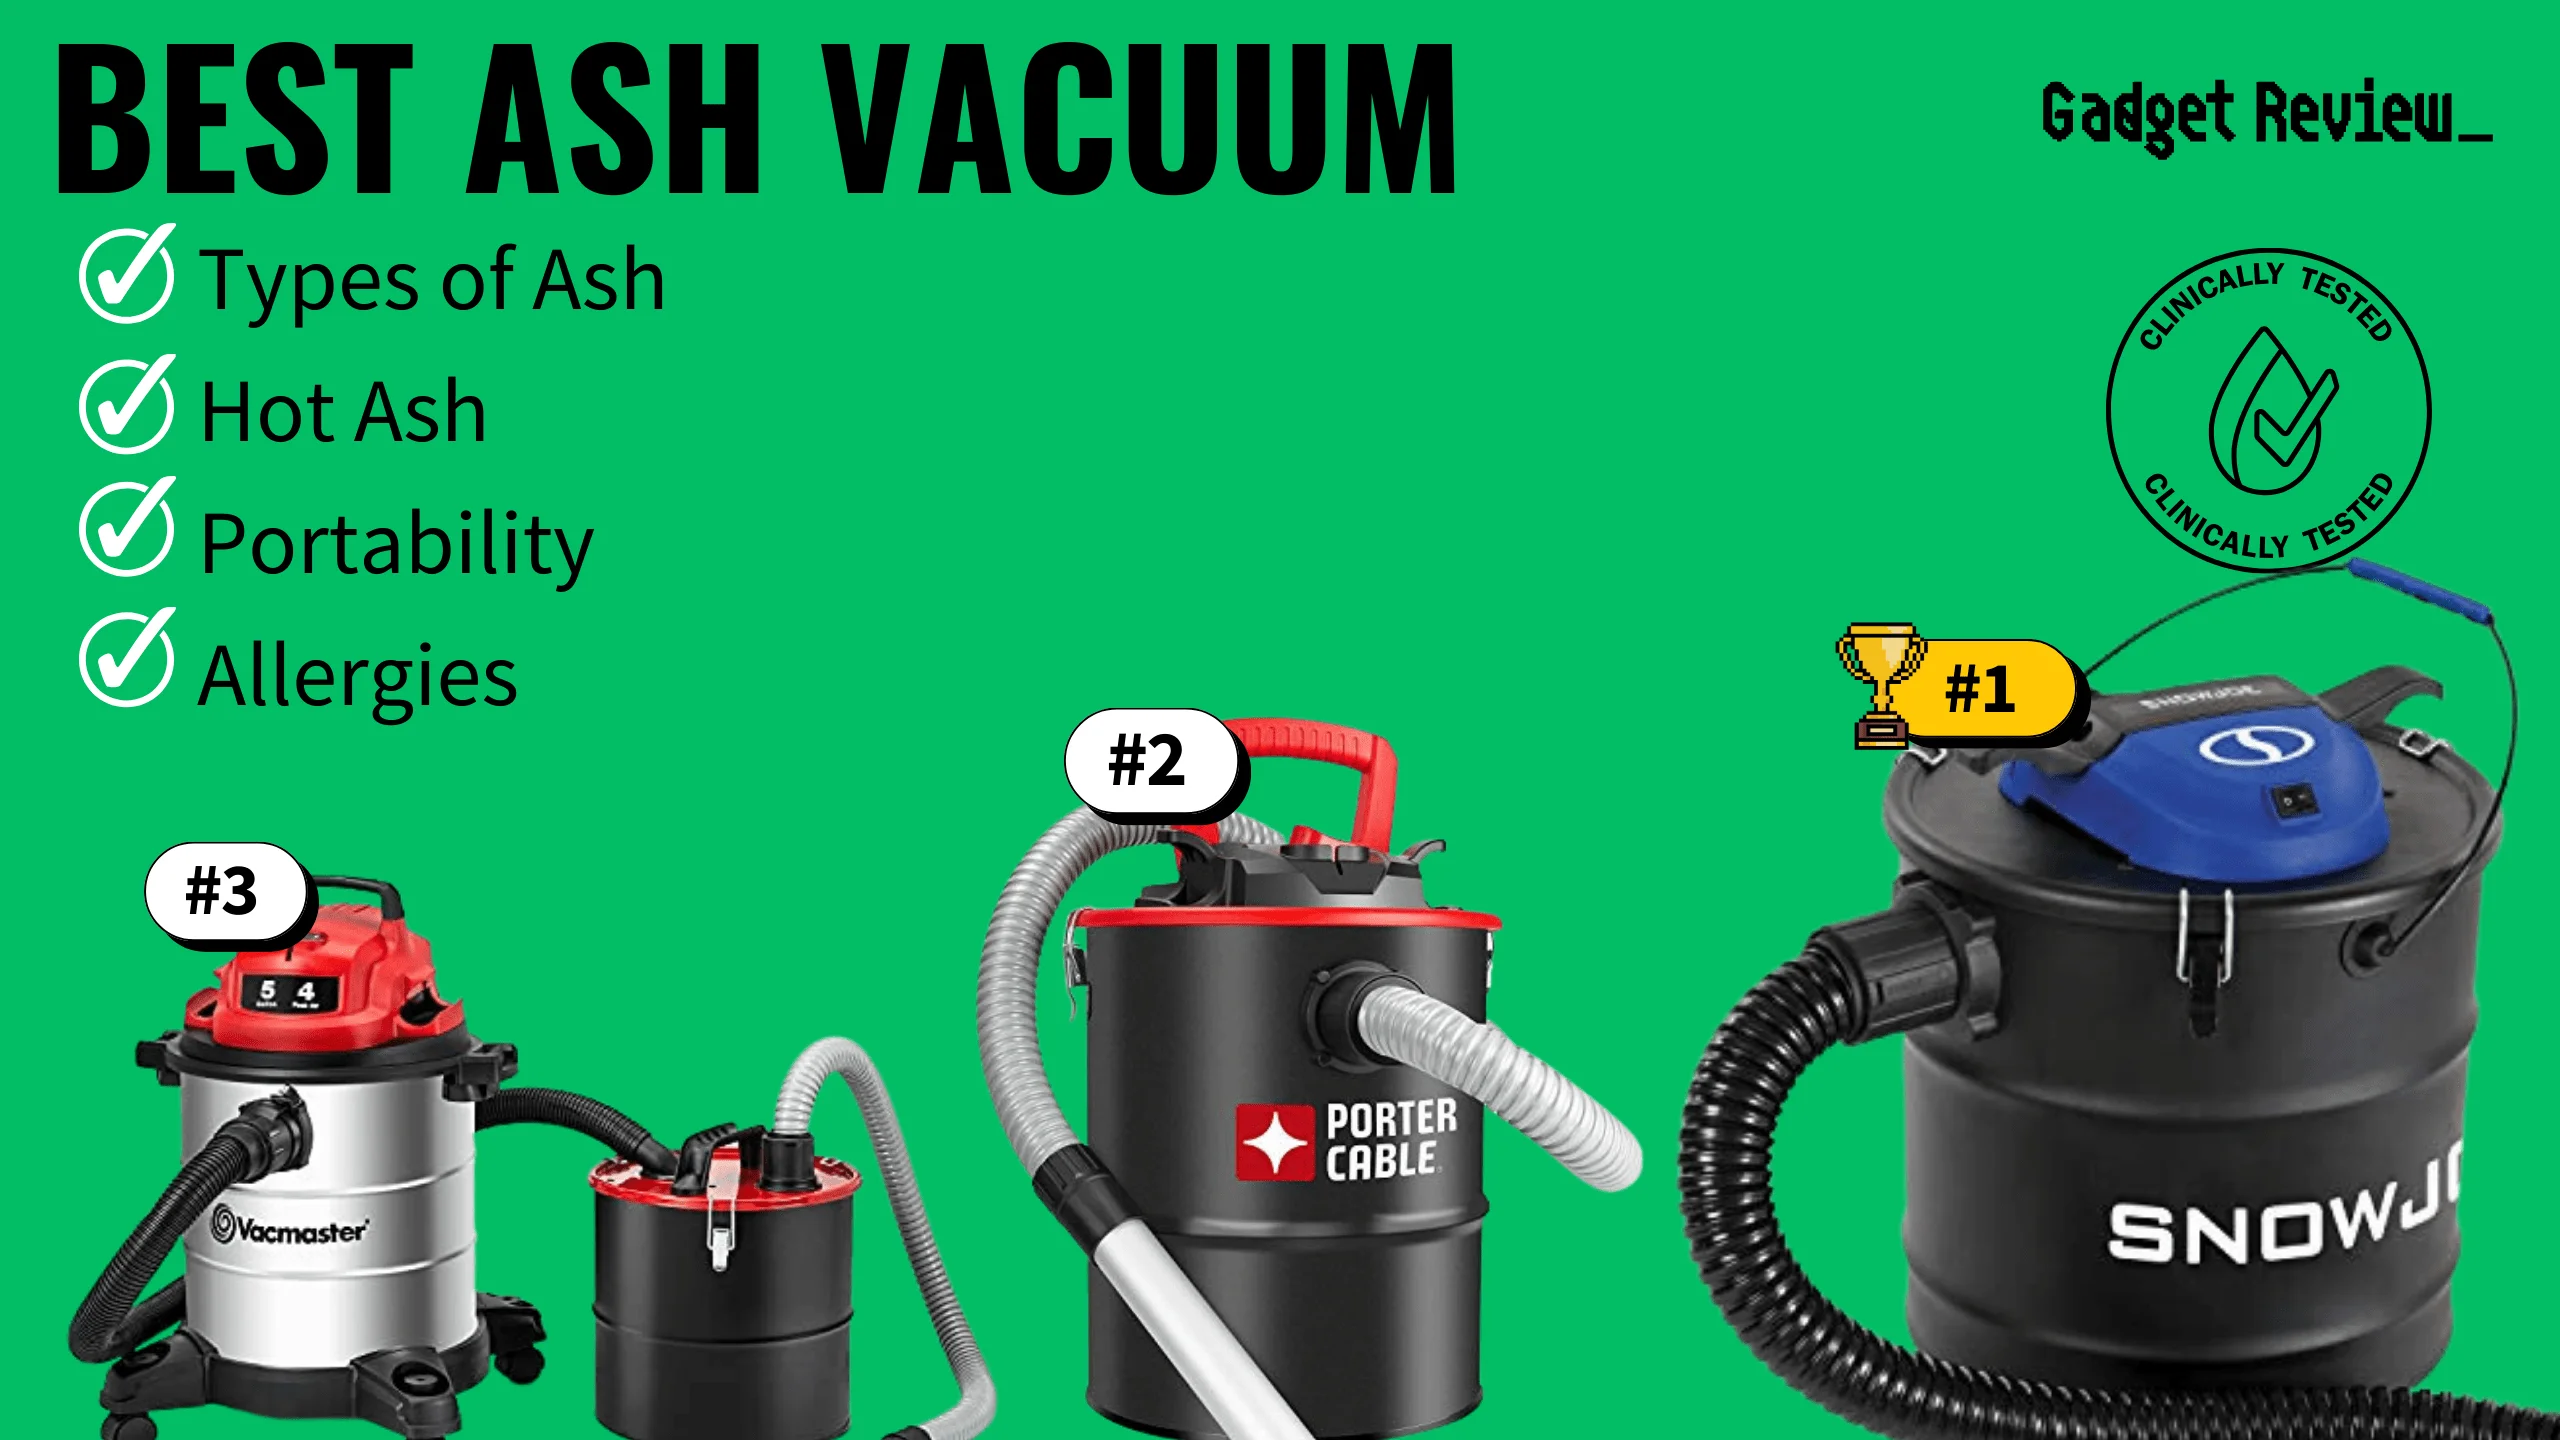 best ash vacuum featured image that shows the top three best vacuum cleaner models